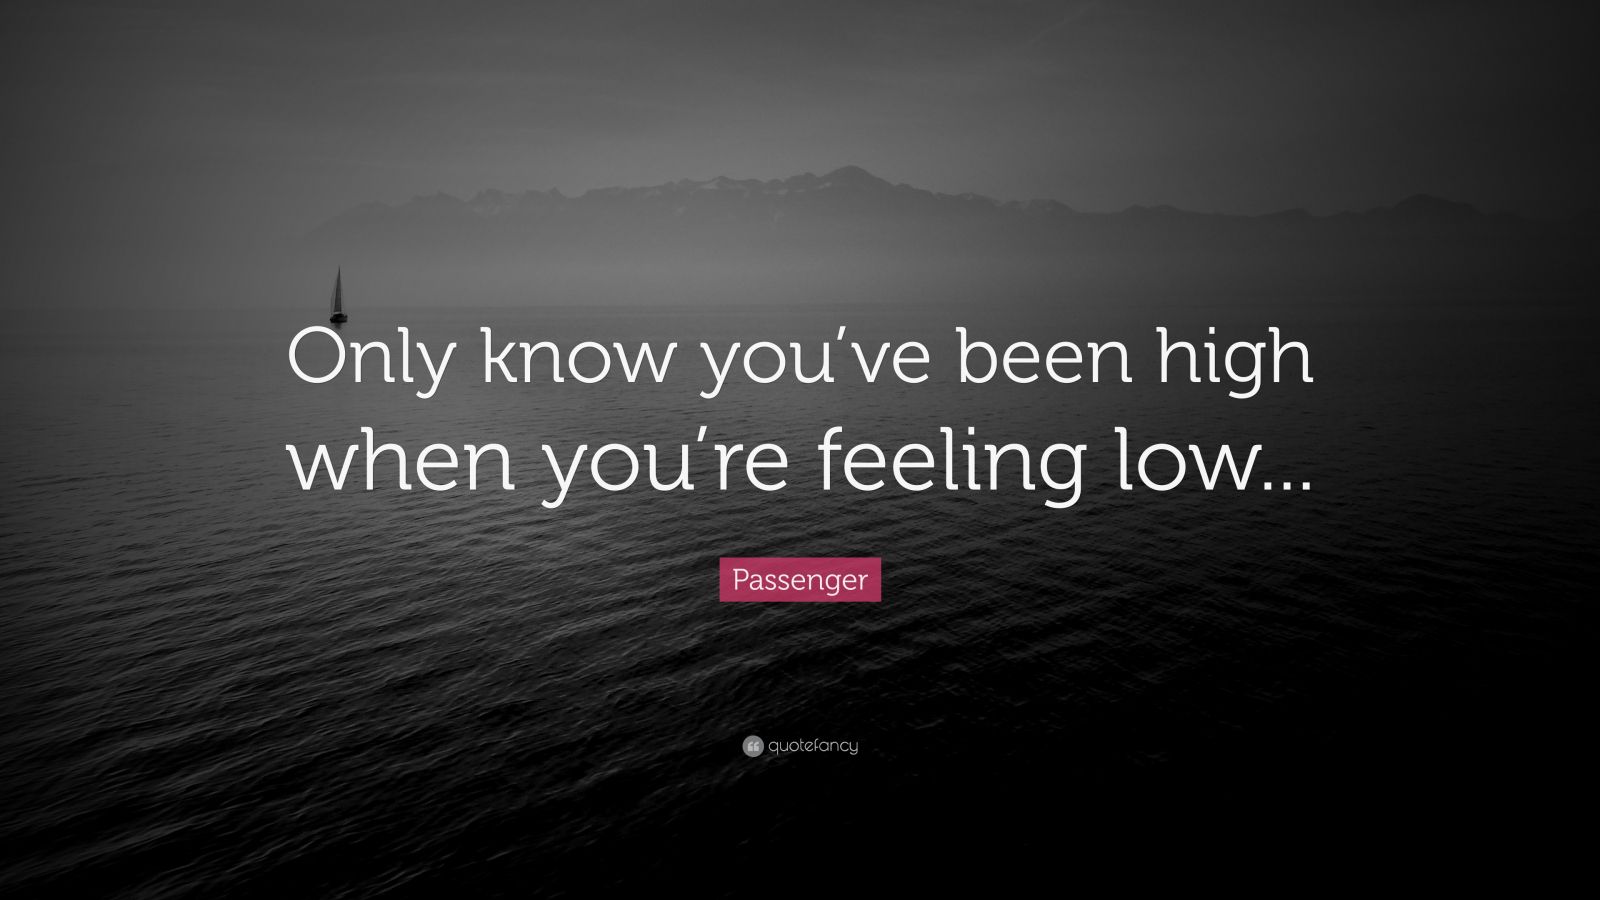 Passenger Quote: “Only know you’ve been high when you’re feeling low